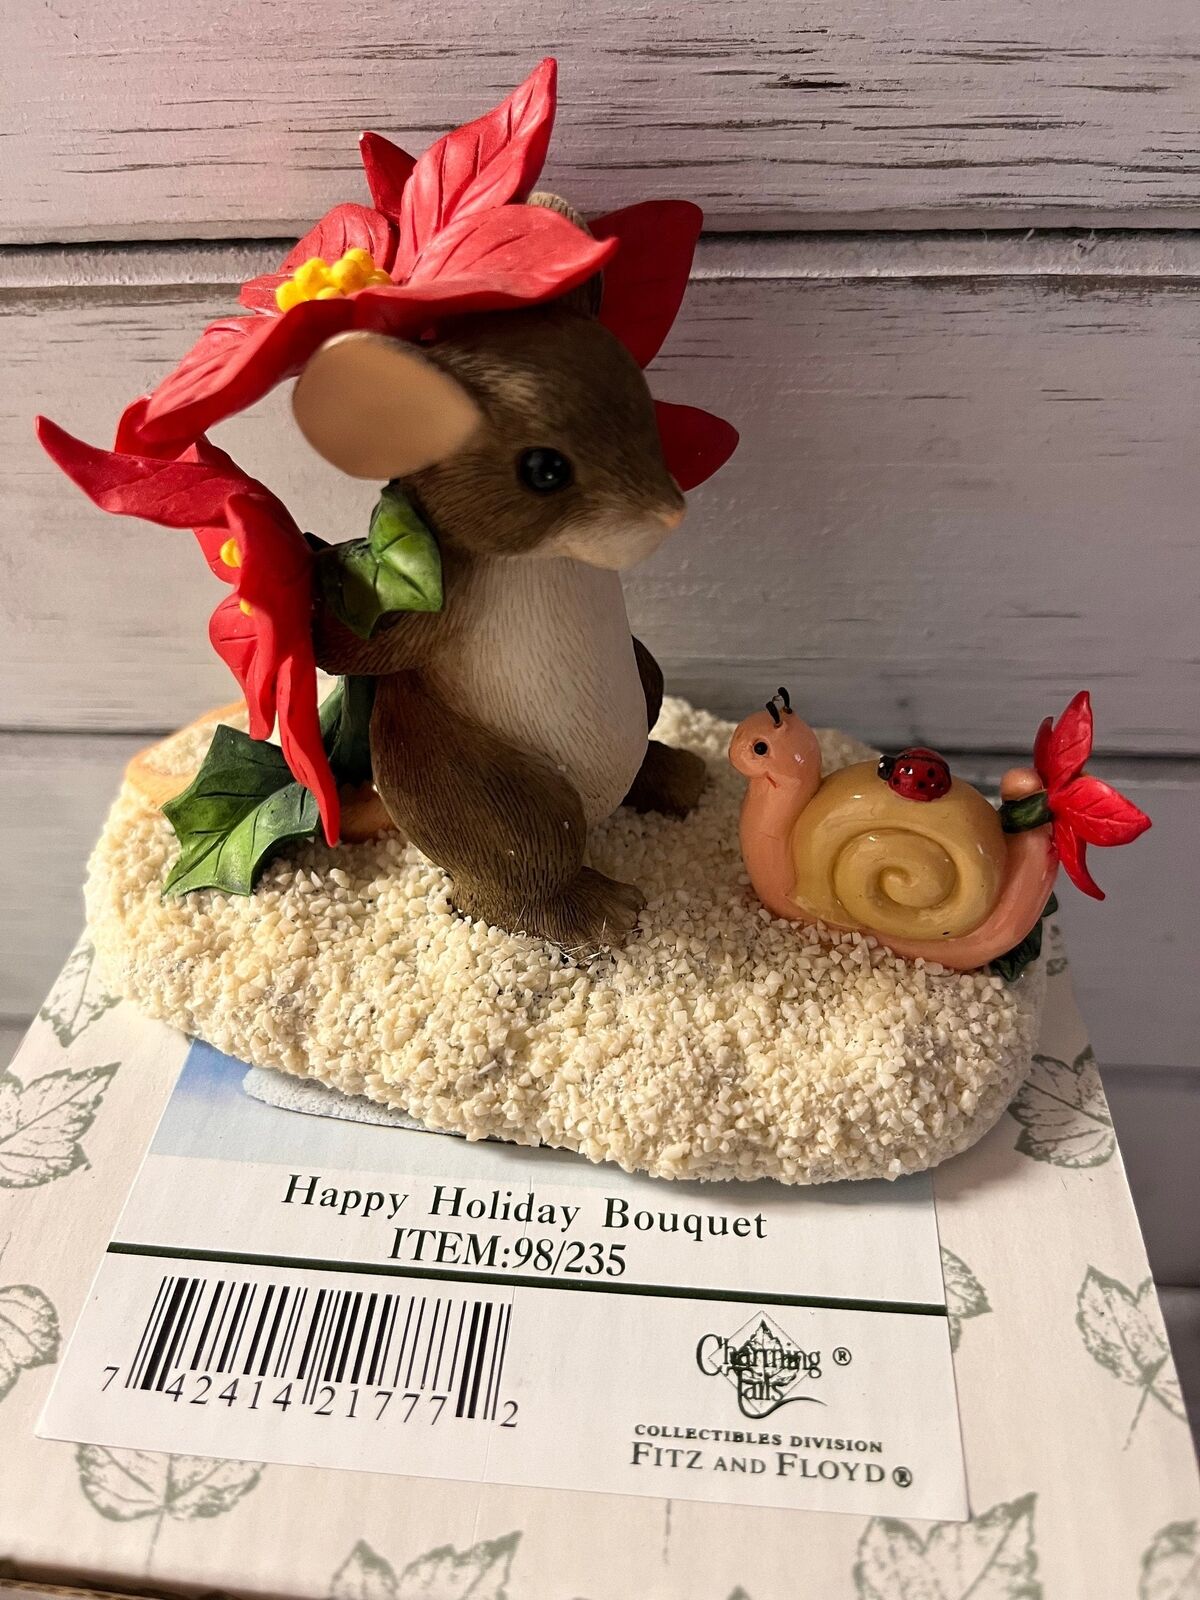 Charming tails by fitz and floyd happy holiday bouquet 98/235